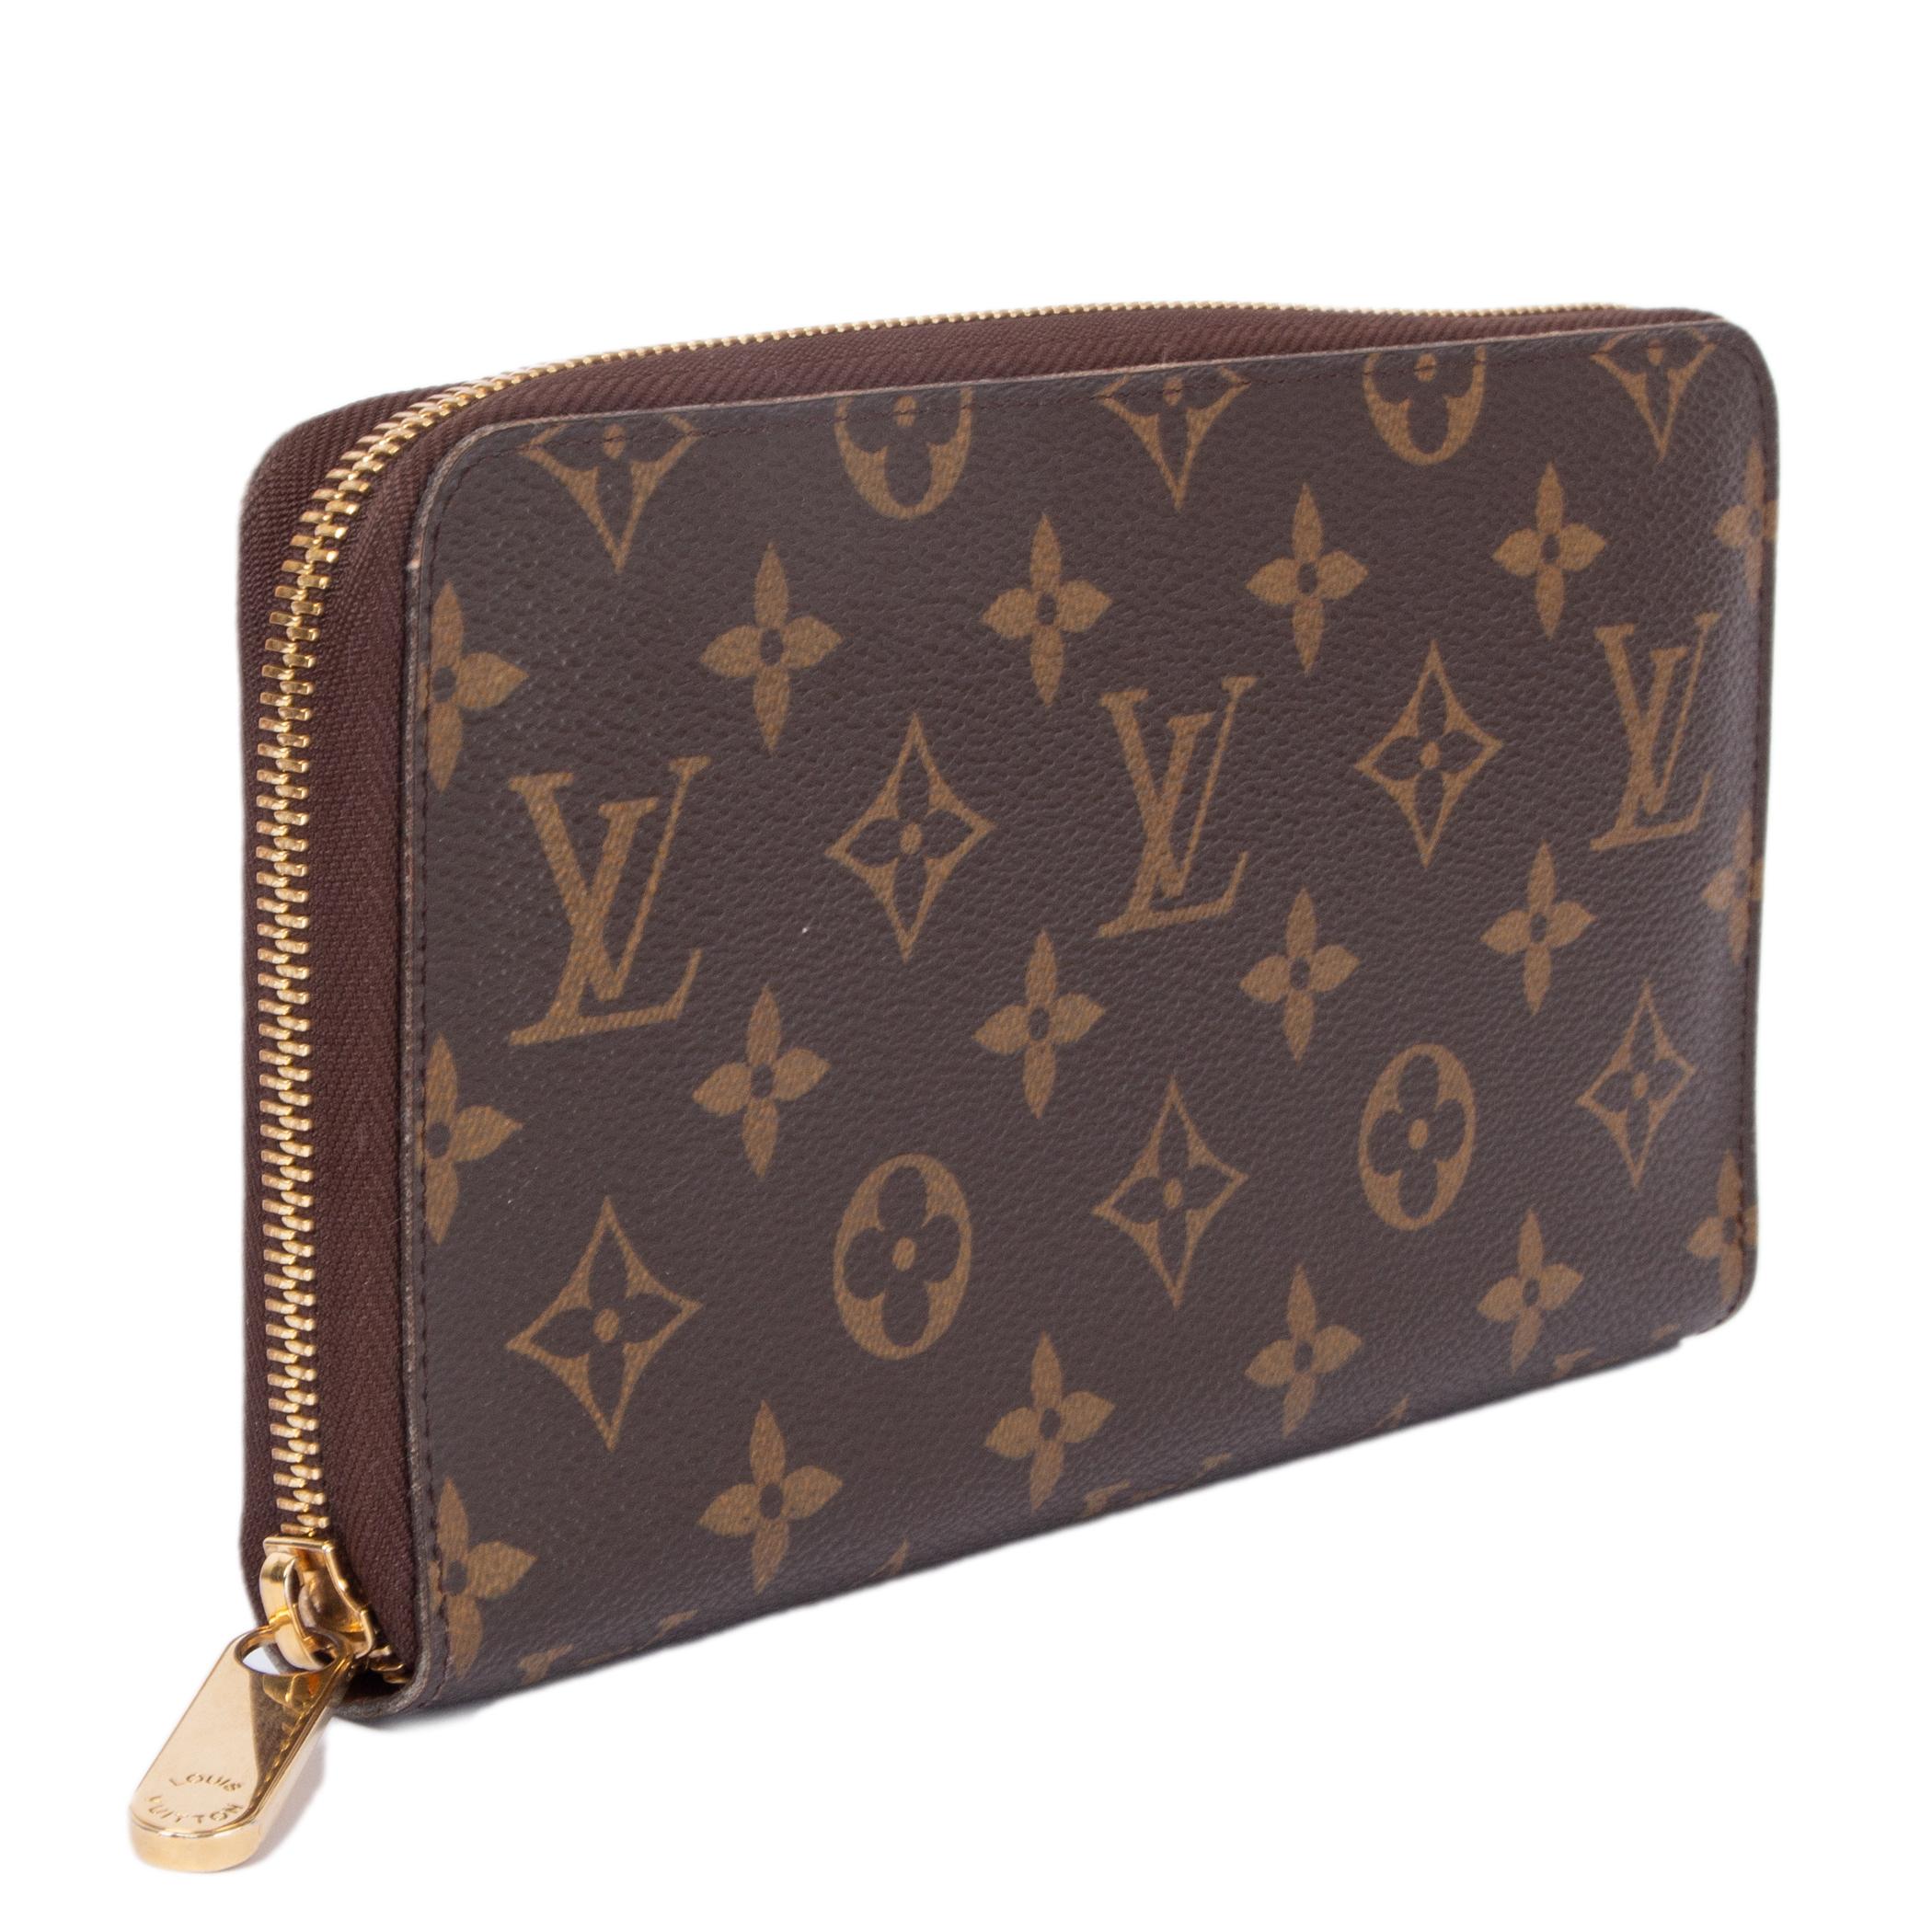 100% authentic Louis Vuitton 'Zippy' organizer wallet in monogram canvas (100%). Features a passport holder, one pen holder. Has 12 card holders and a coin compartment with zipper closure. Lined in cognac coated canvas. Has been used and is in